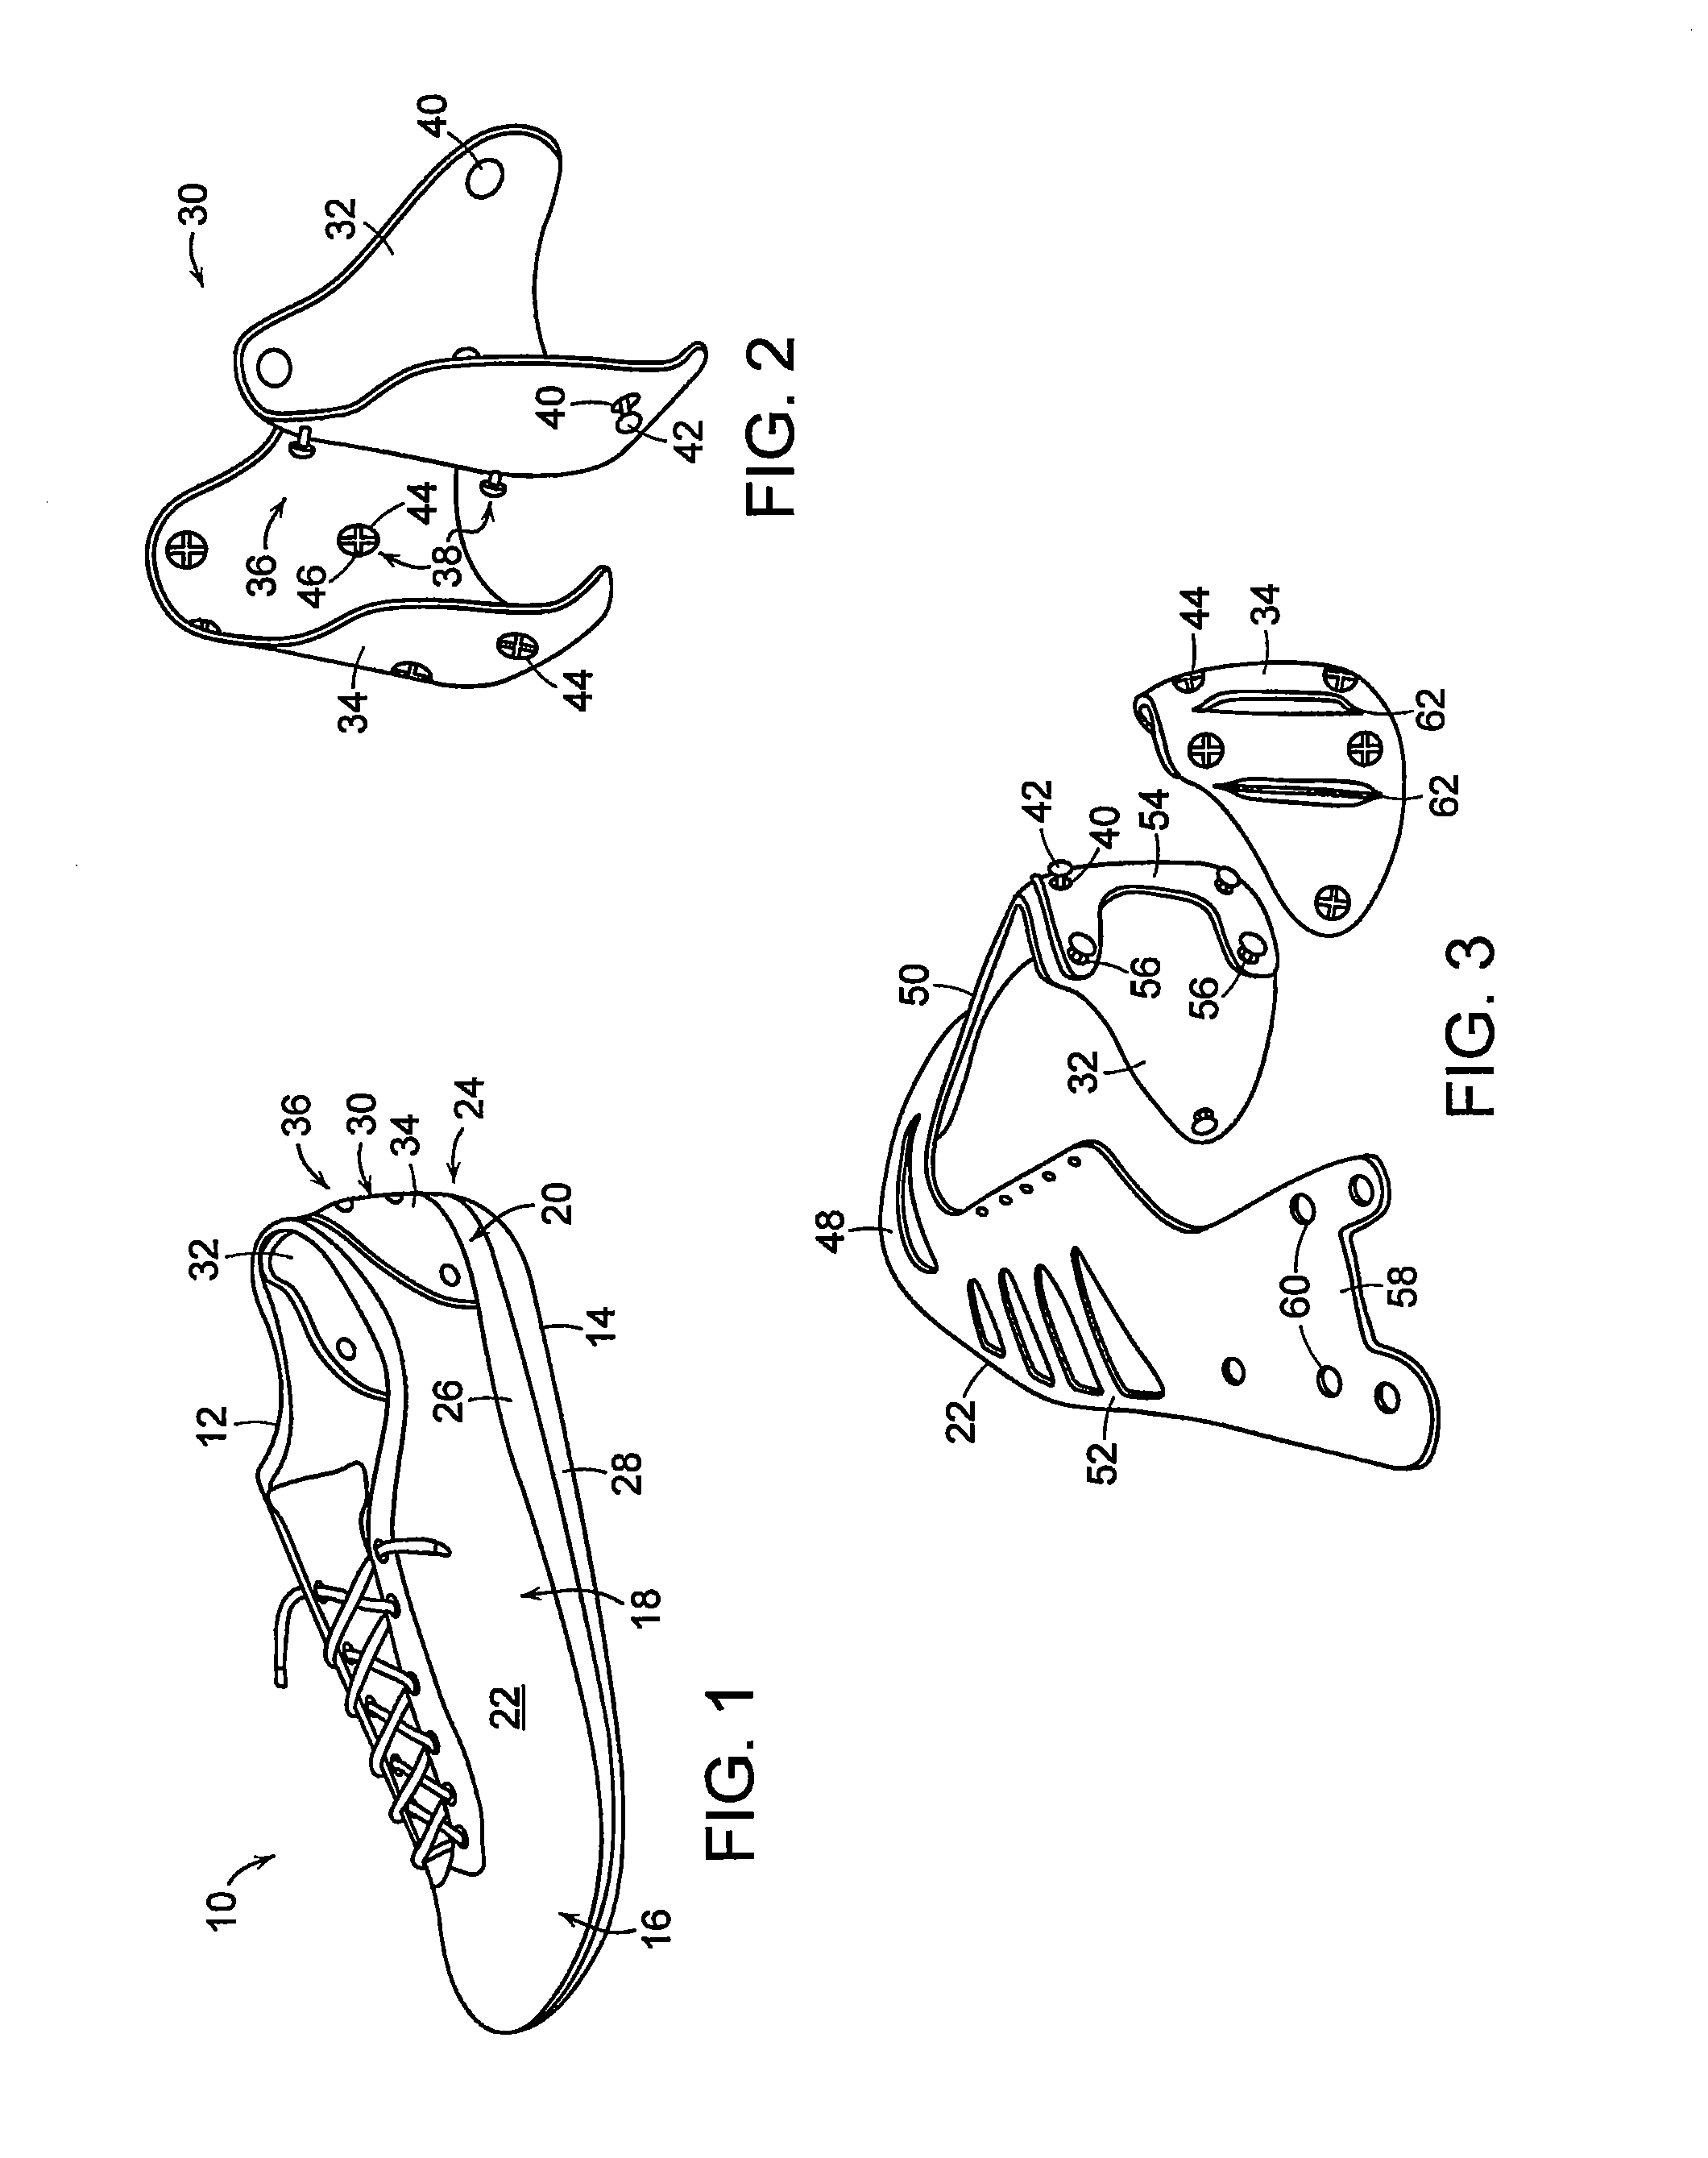 Article of footwear with upper support assembly